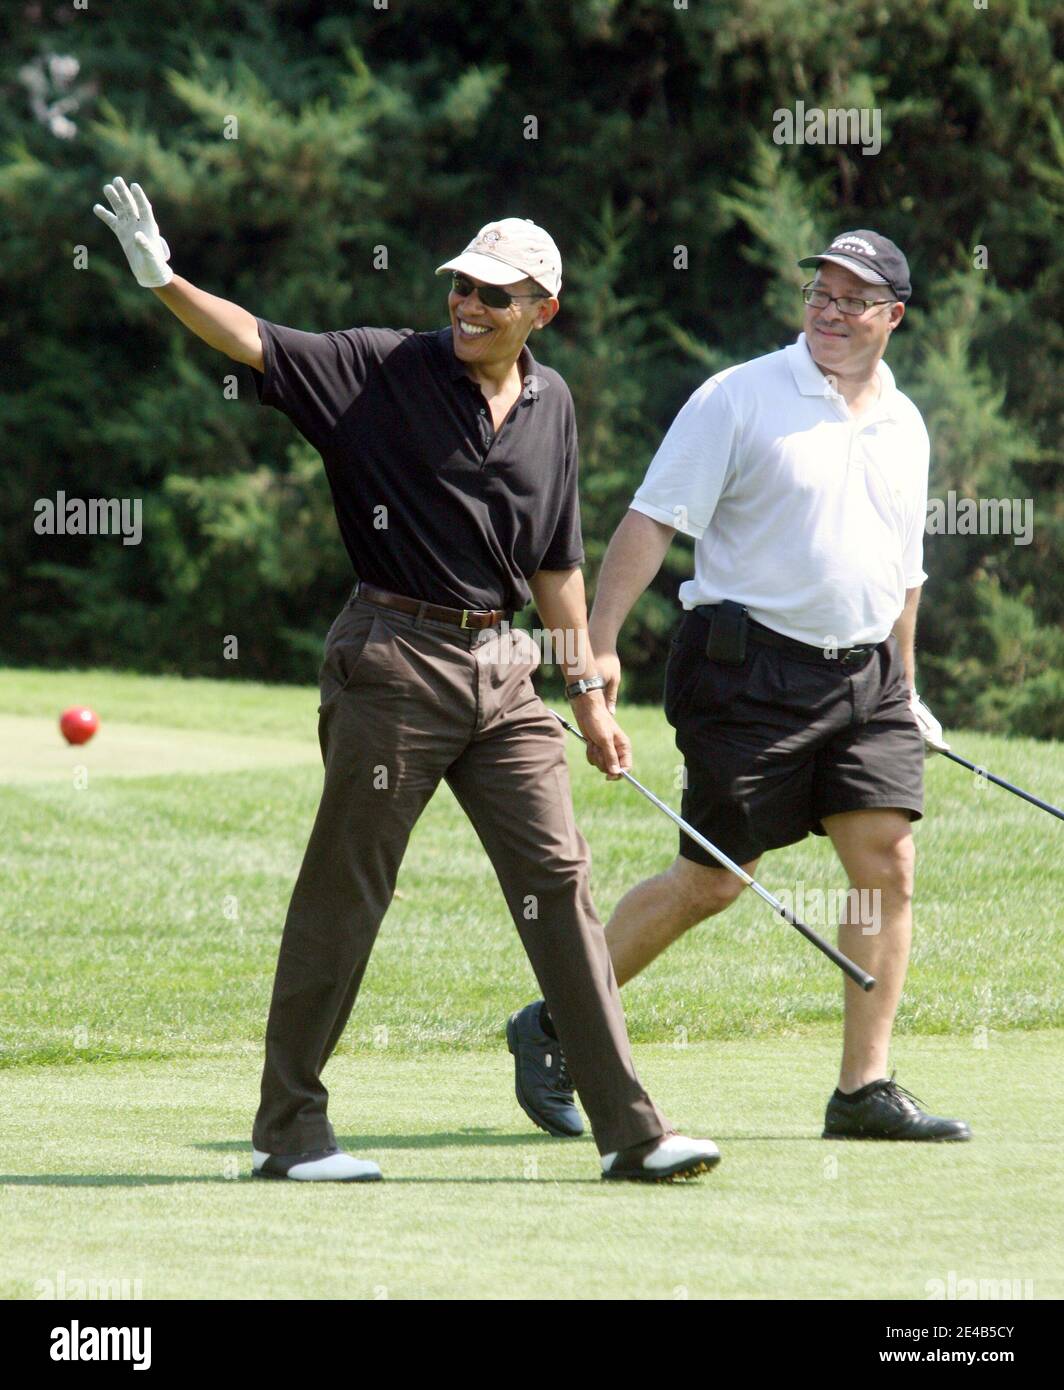 US President Barack Obama, with Dr. Eric Whitaker, a long-time friend of Chicago, waves to spectators on Farm Neck Golf Course in Oak Bluffs, Massachussetts, USA on August 24, 2009, during a round of golf. The President's tee shot landed in the woods. The other players in the foursome were Marvin Nicholson, White House trip director, and Robert Wolf, CEO of UBS. Pool photo by Vincent DeWitt/ABACAPRESS.COM Stock Photo